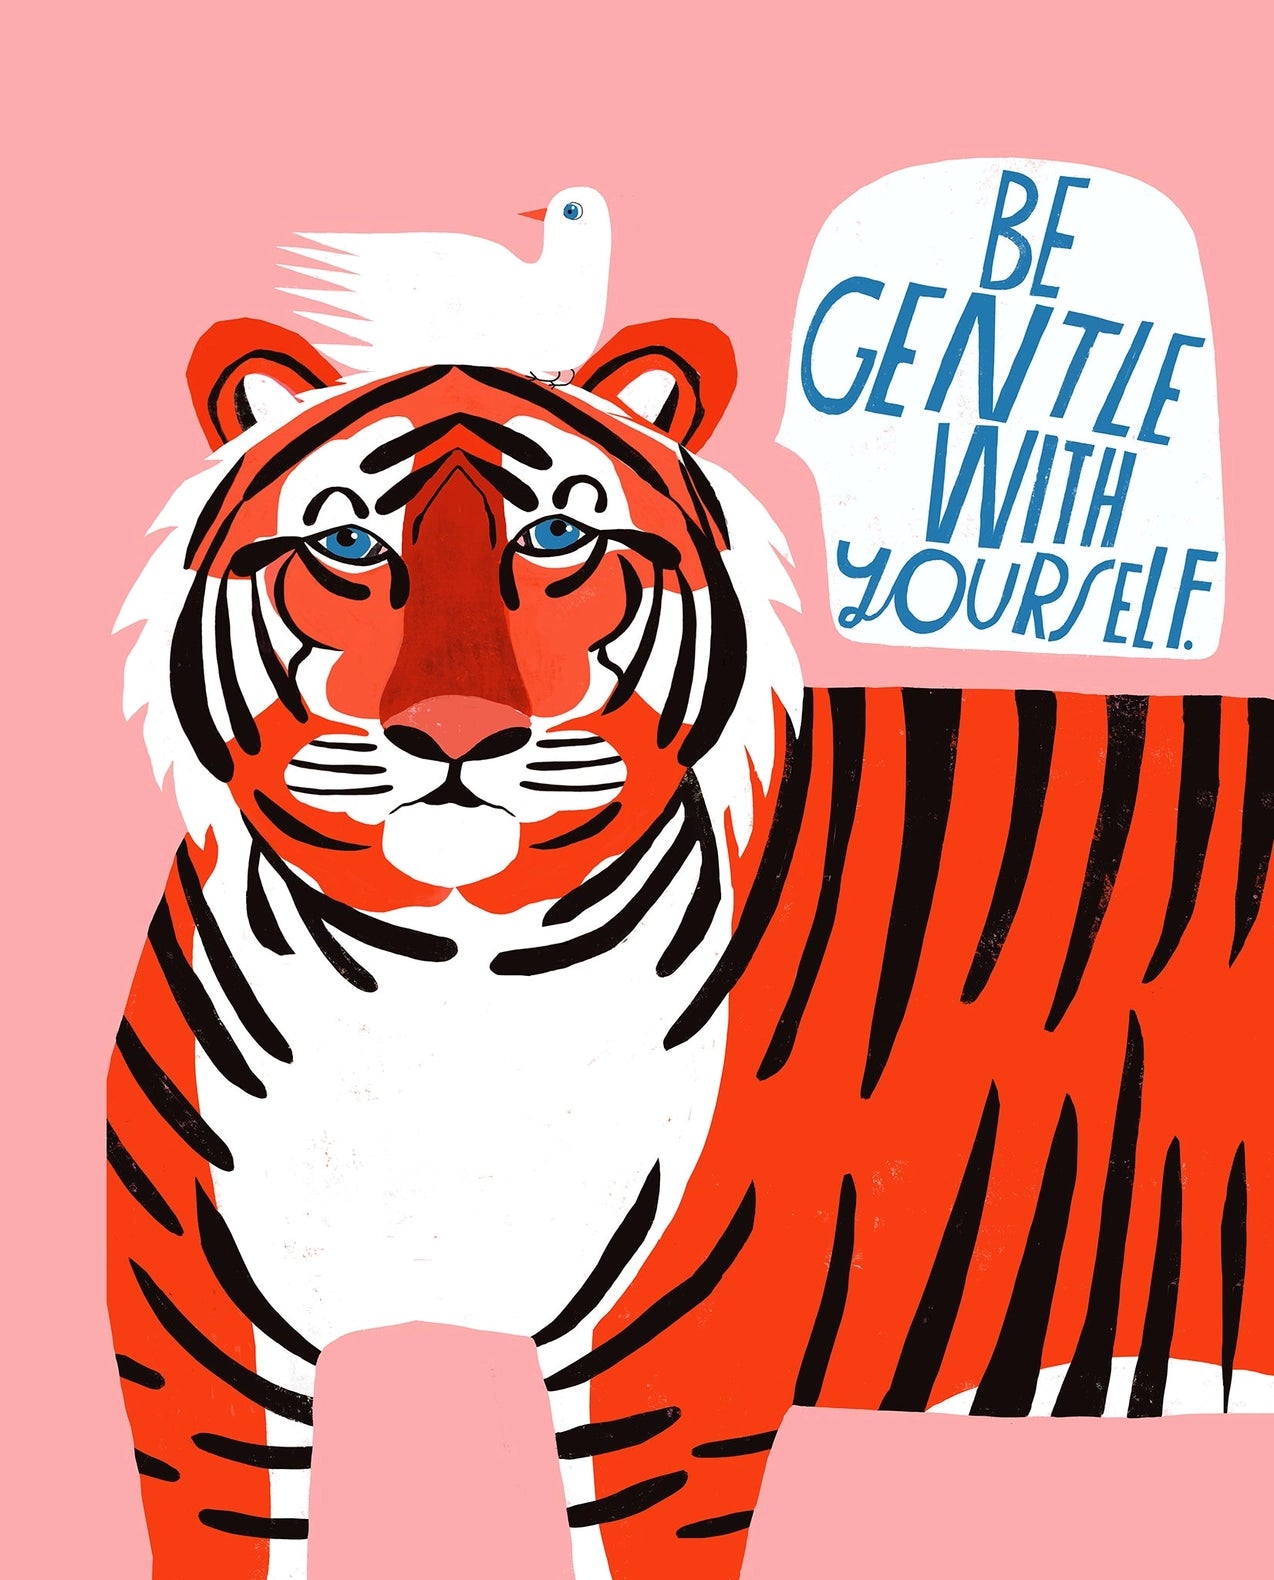 Be Gentle With Yourself - Giclee Print by Lisa Congdon